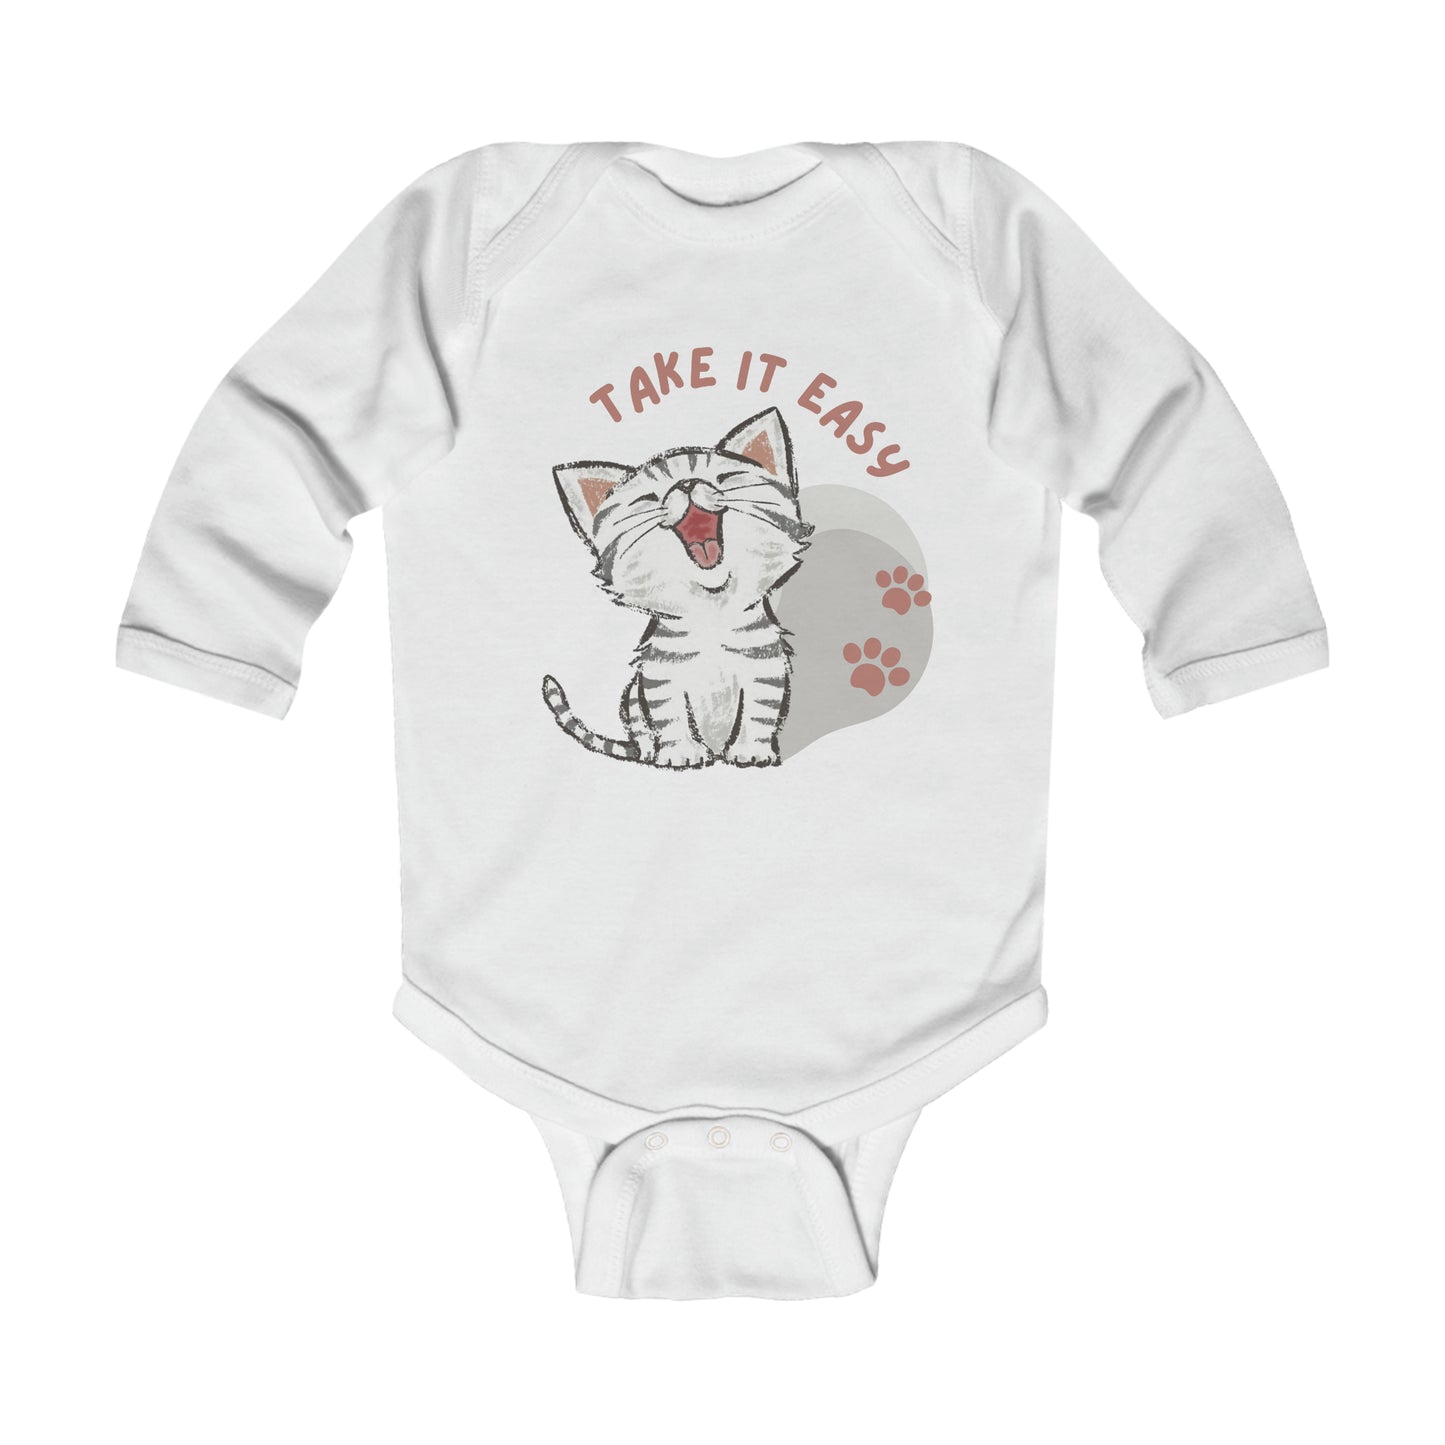 "Experience Effortless Style and Comfort with running with Ease Infant Long Sleeve Bodysuit for Your Little One's Ultimate Comfort and Chic Appearance"